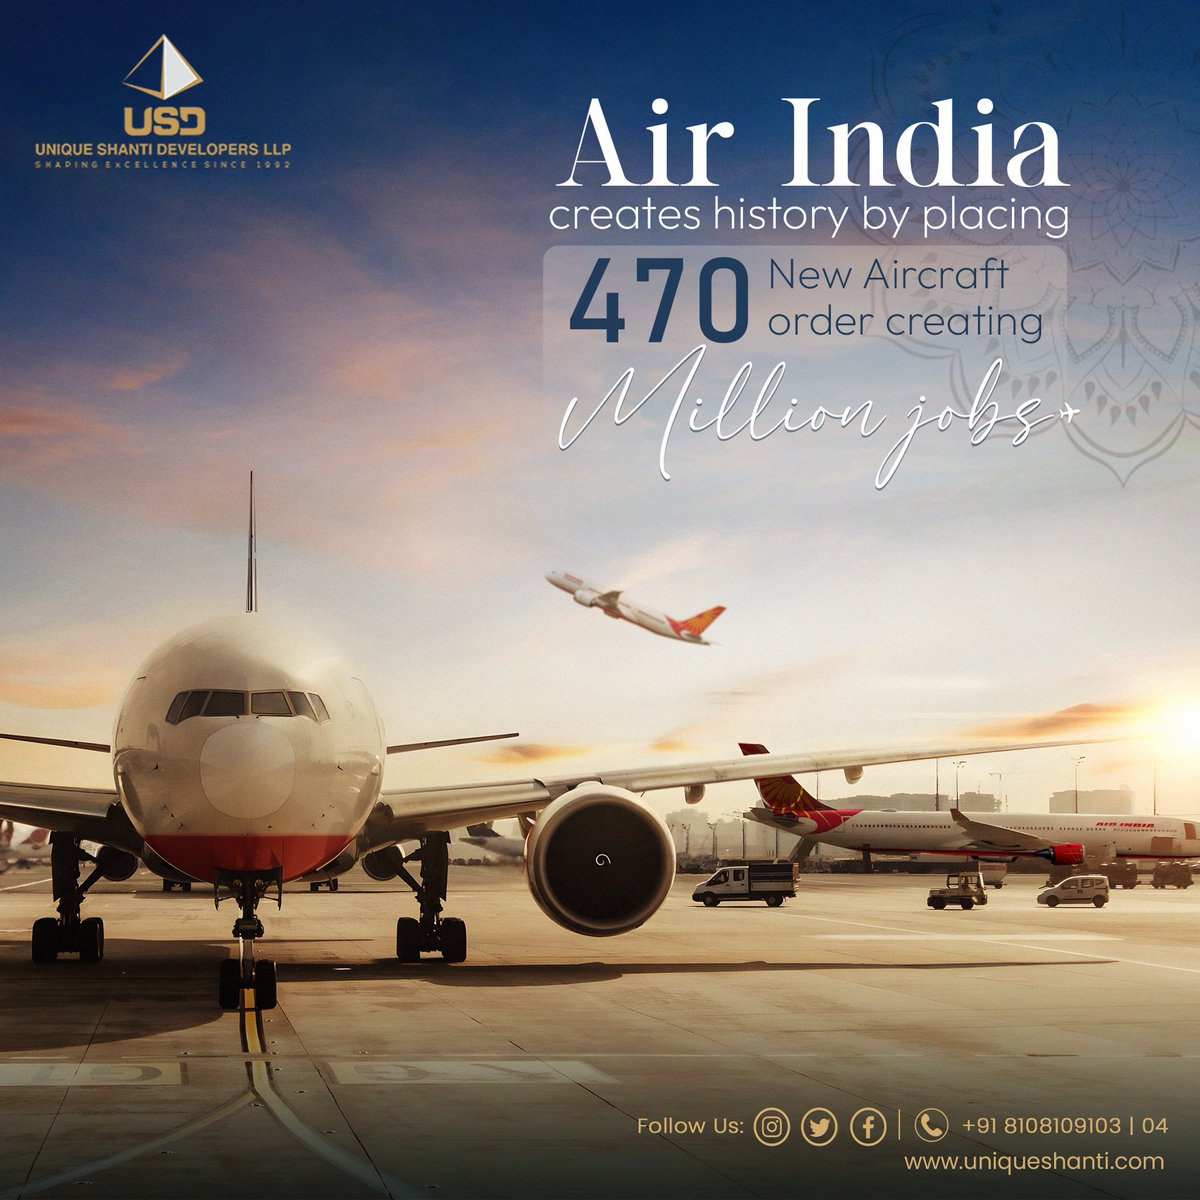 #AirIndia purchase of #470AirCraft from #Boeing & Airbus is a significant milestone for the #Aviation industry & global #Economy. The positive impact will be leading to increased #EconomicActivity & prosperity.

#UniqueShantiDevelopers #EconomicDevelopment #EconomicGrowth